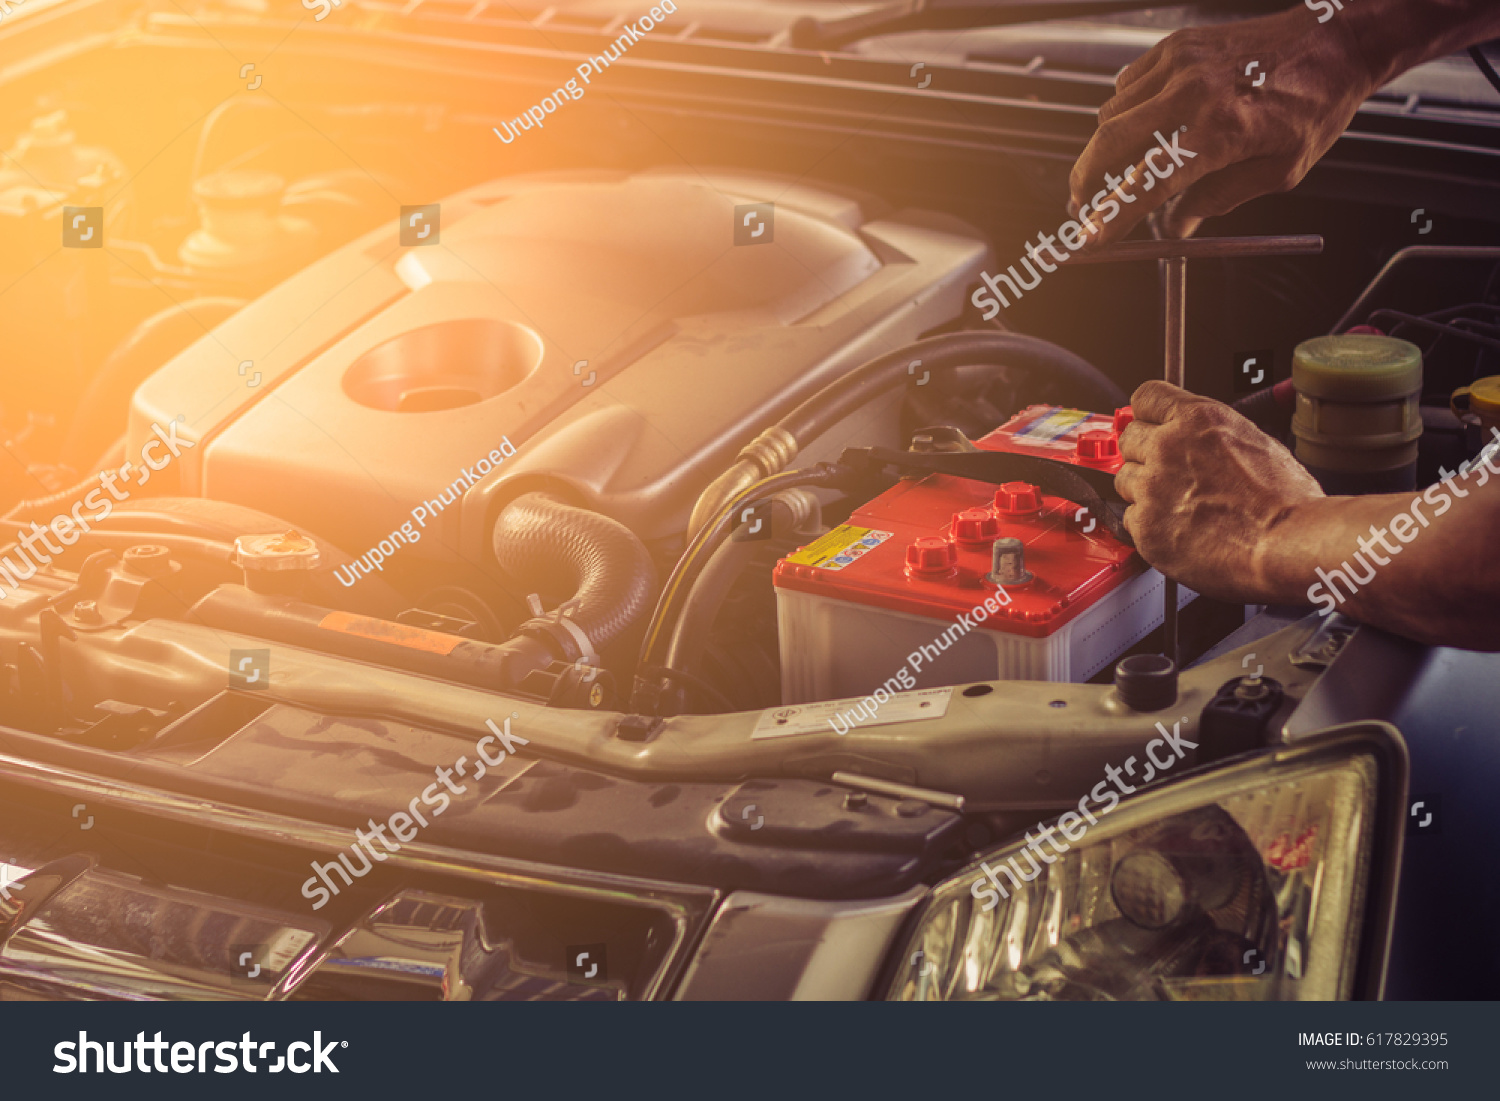 Car service ,fitting a car battery with wrench / soft focus picture  #617829395